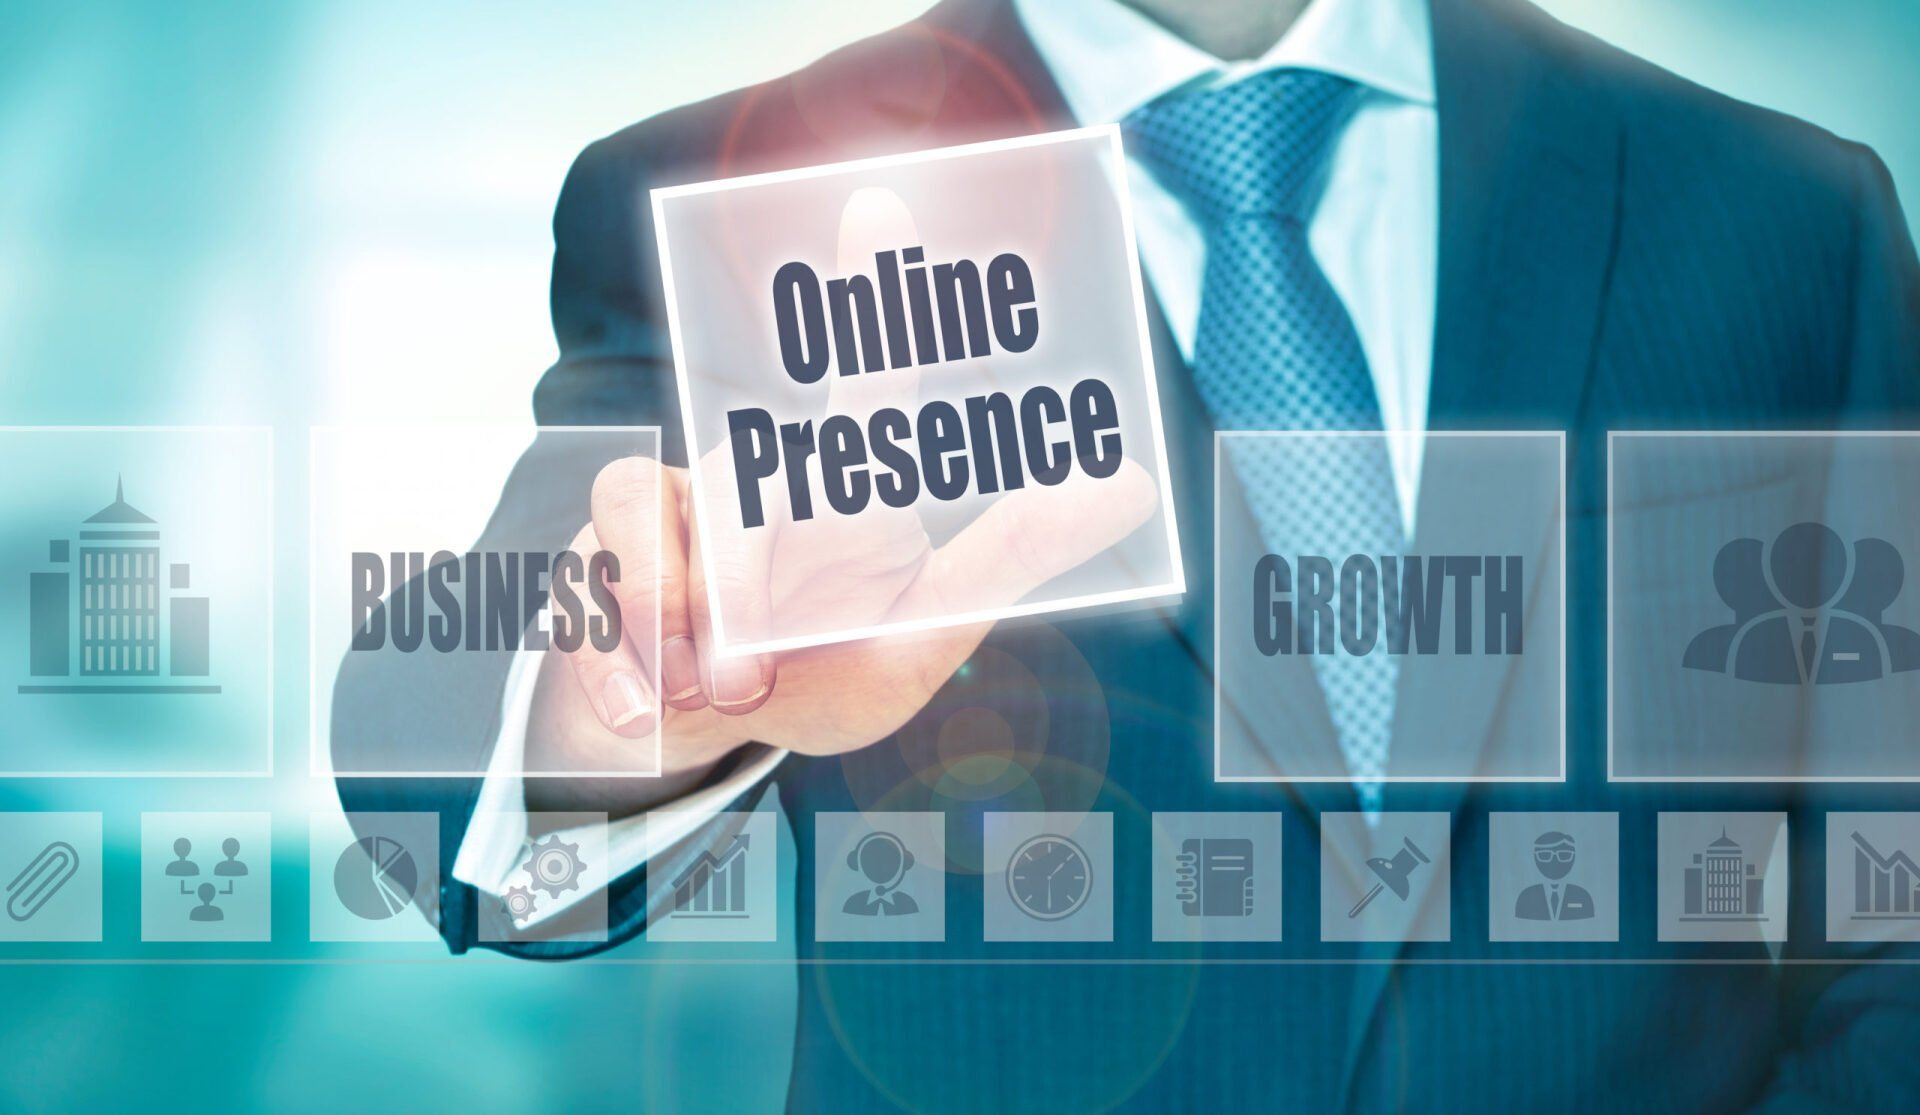 clicked Online presence